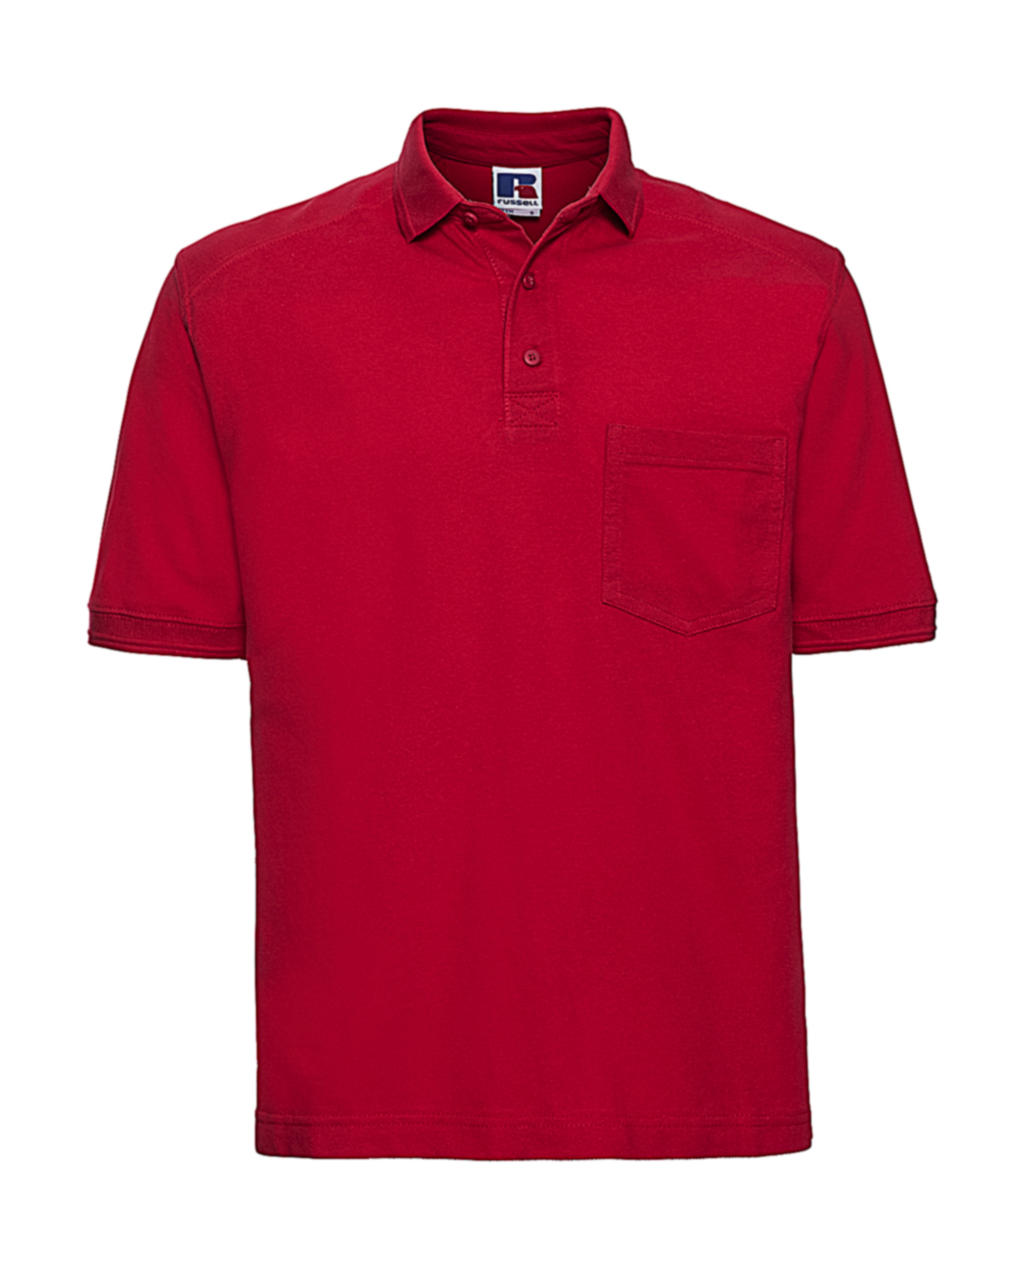  Heavy Duty Workwear Polo in Farbe Classic Red